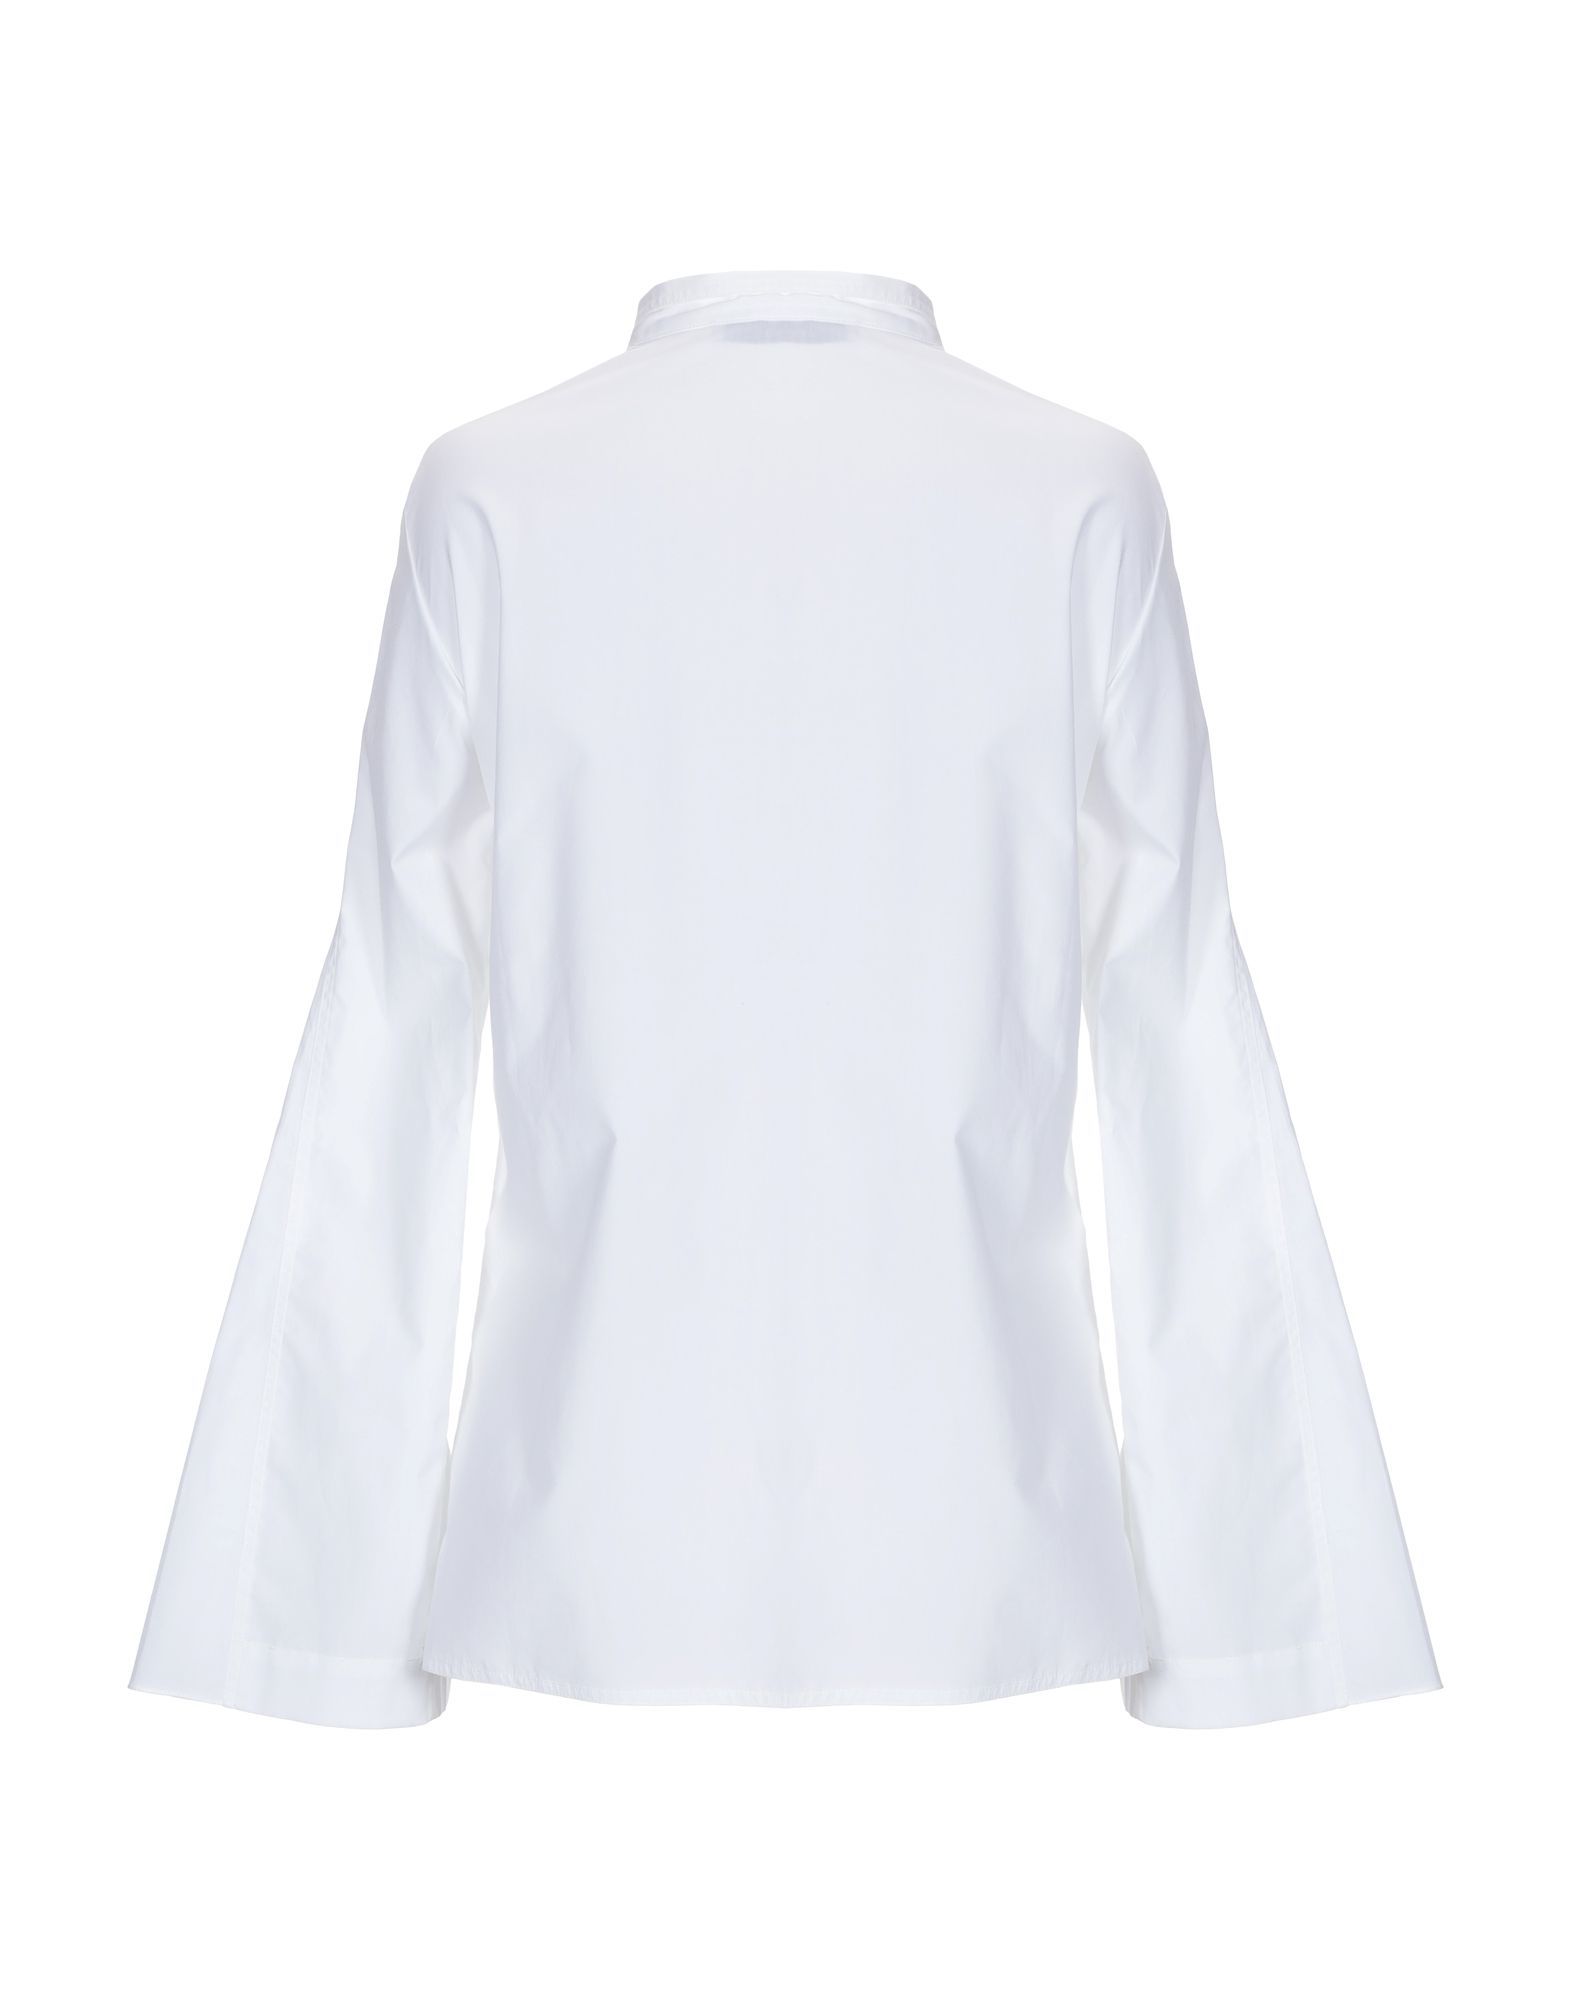 plain weave, no appliqués, basic solid colour, regular fit, front closure, button closing, long sleeves, round collar, two breast pockets, stretch, small sized